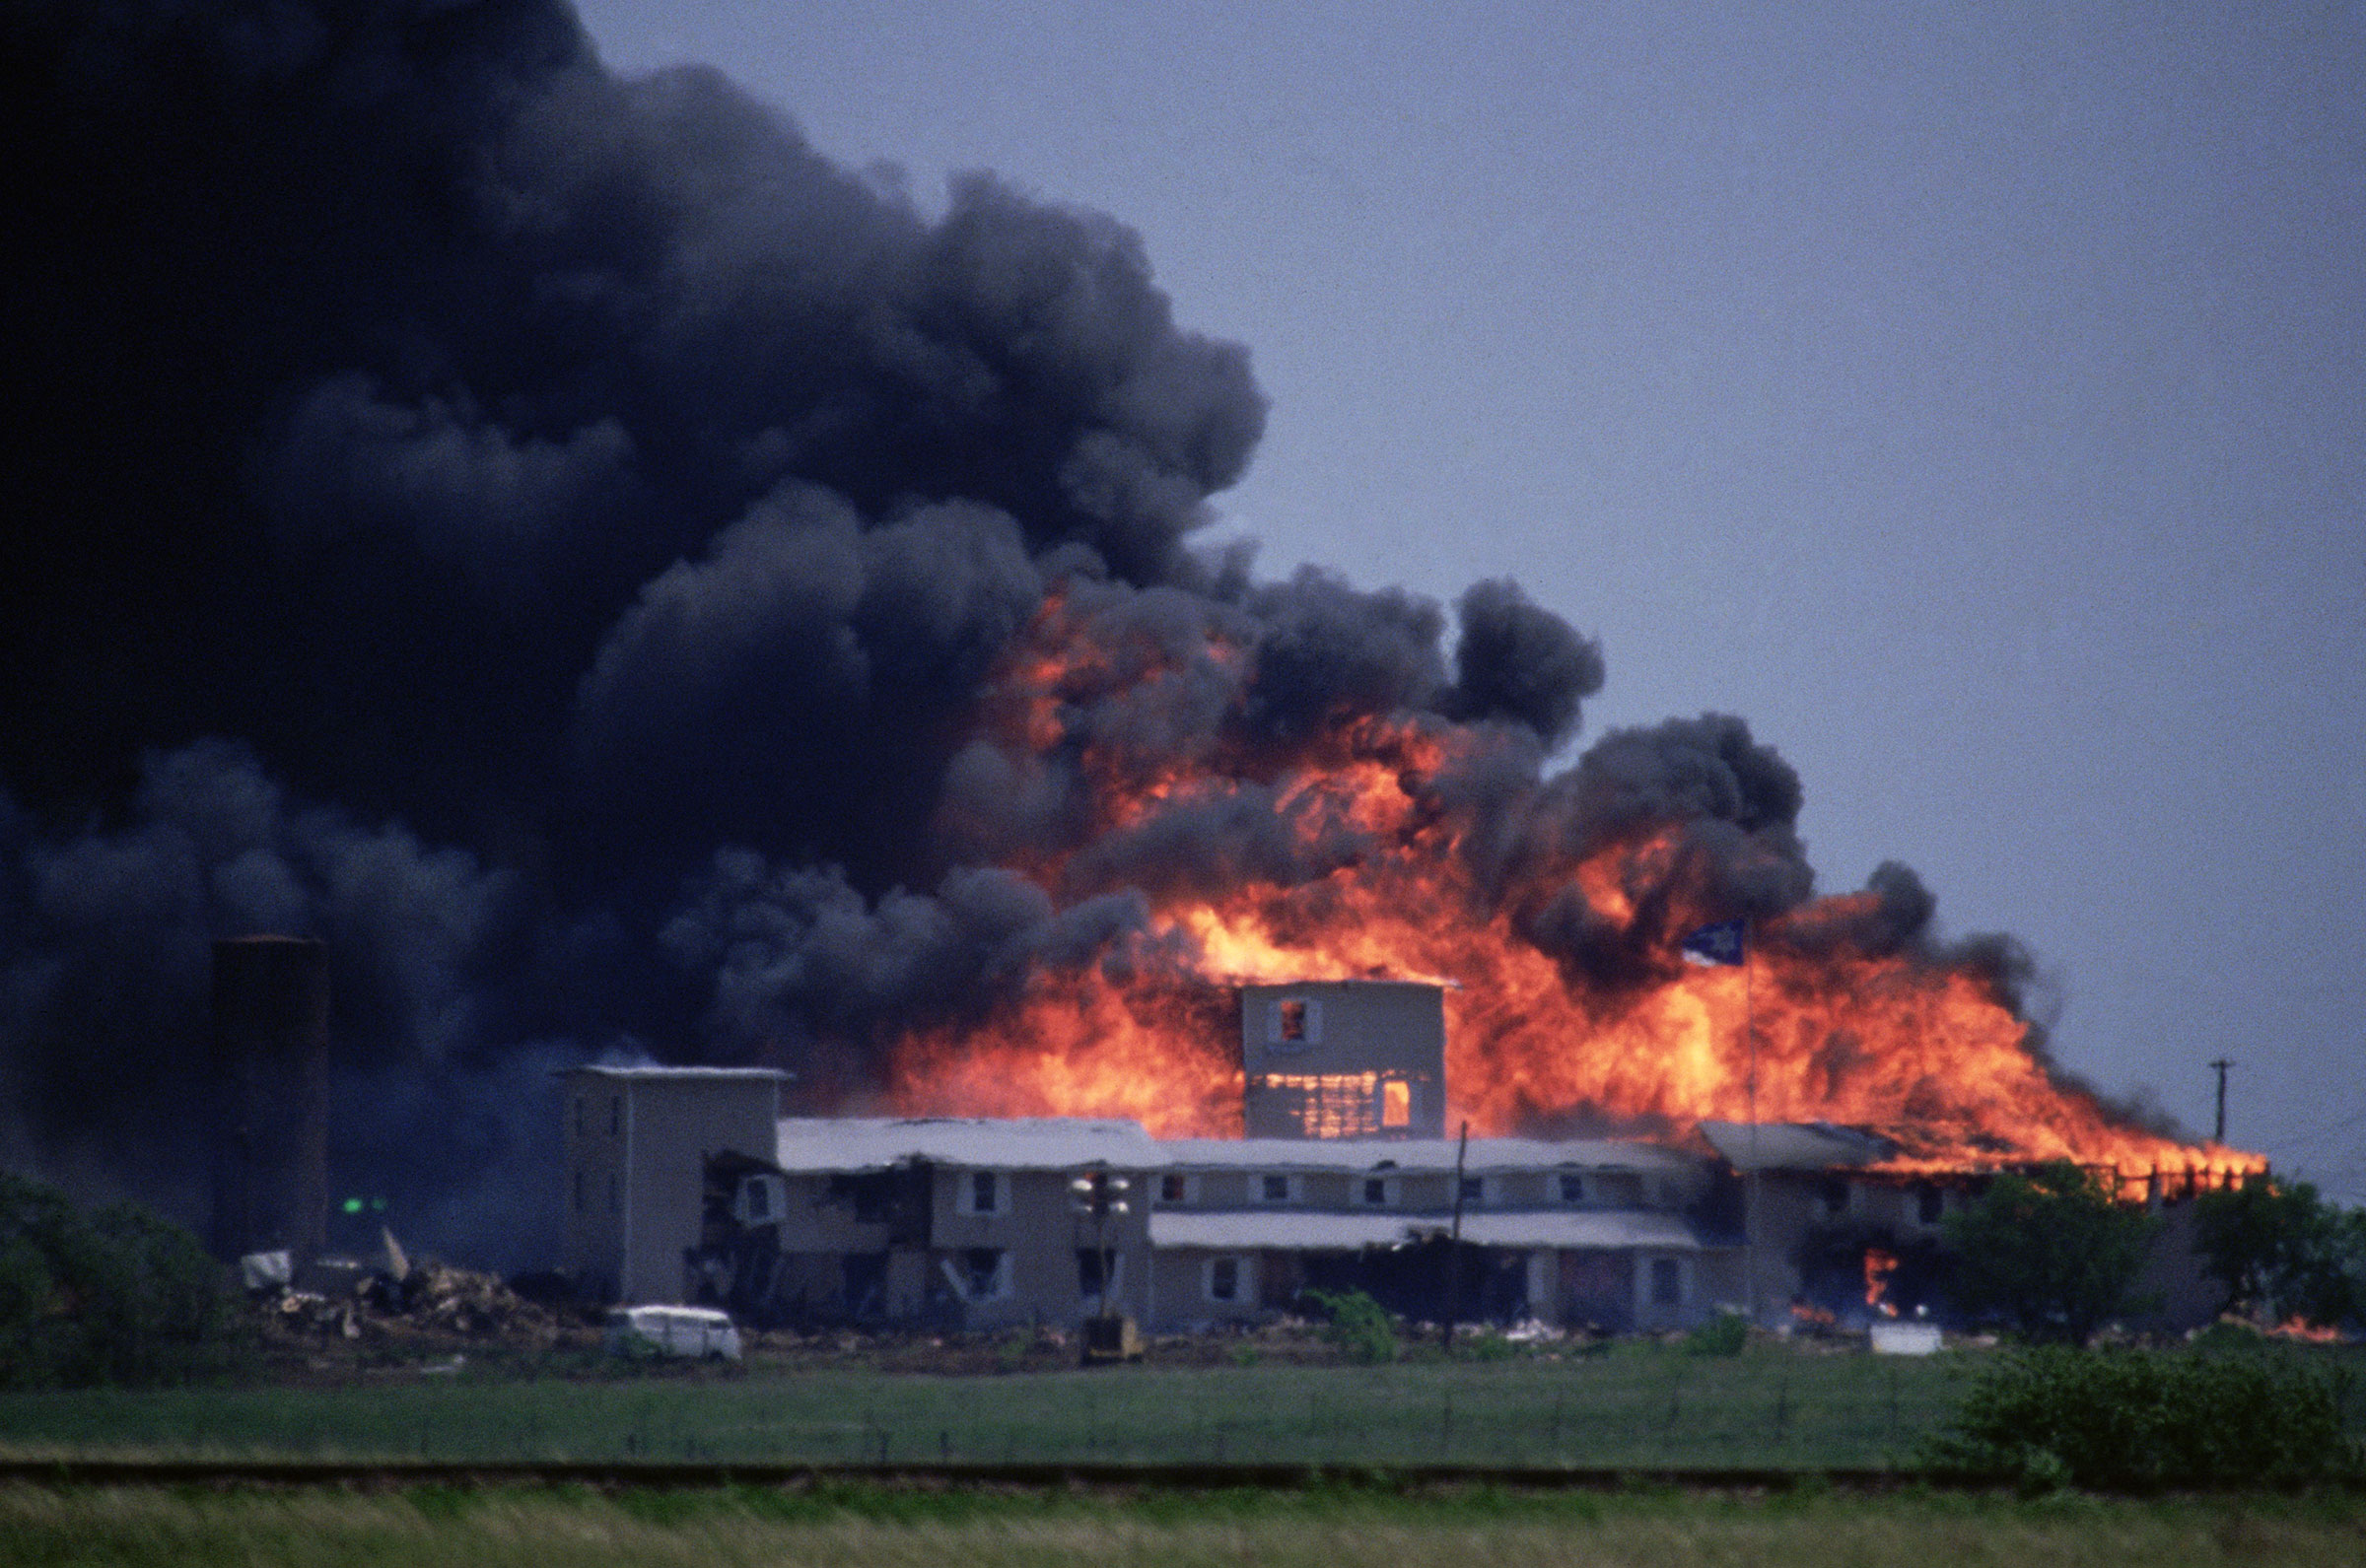 The Branch Davidians' Mount Carmel compound outside of Waco, Texas, burns to the ground during the 1993 raid by the ATF. (Greg Smith—CORBIS/Corbis/Getty Images)